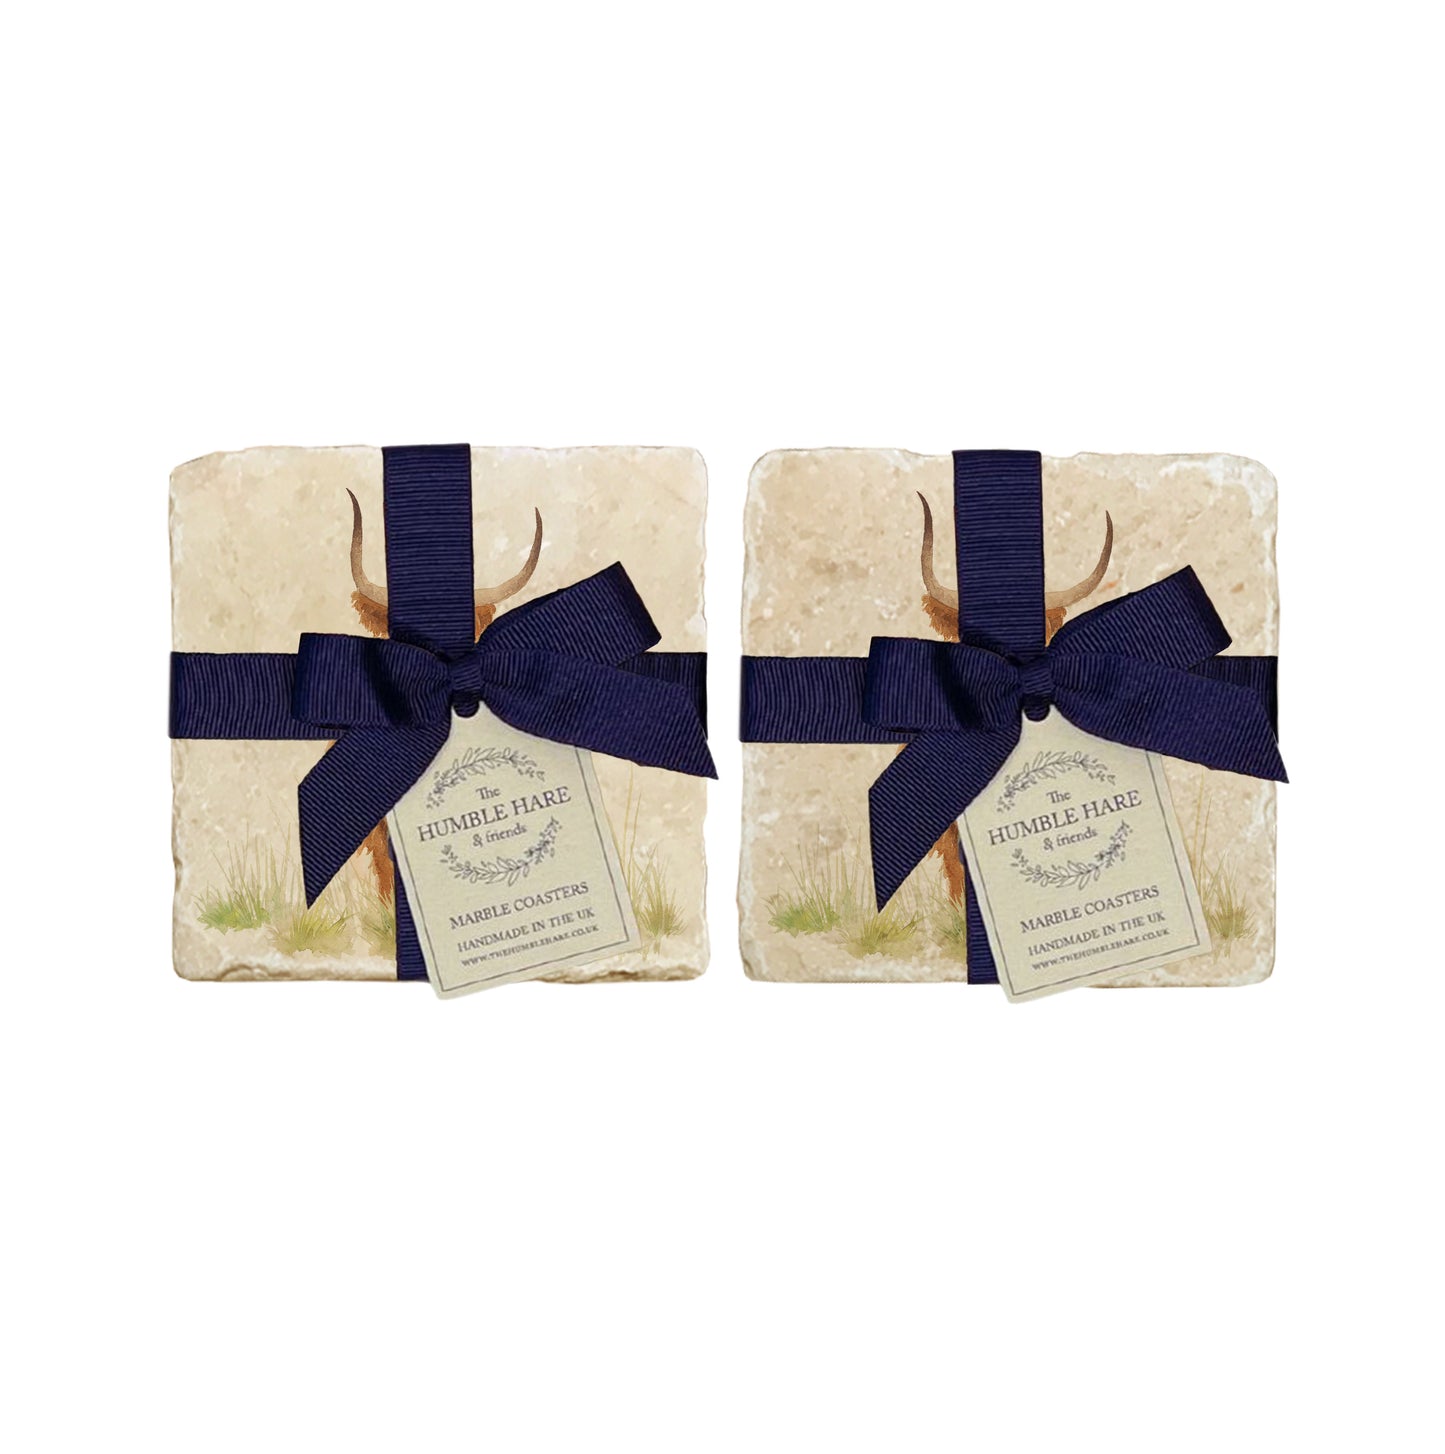 A set of 4 handmade marble coasters packaged in 2 pairs, with a luxurious blue bow and gift tag. The coasters feature a watercolour design of a highland cow.